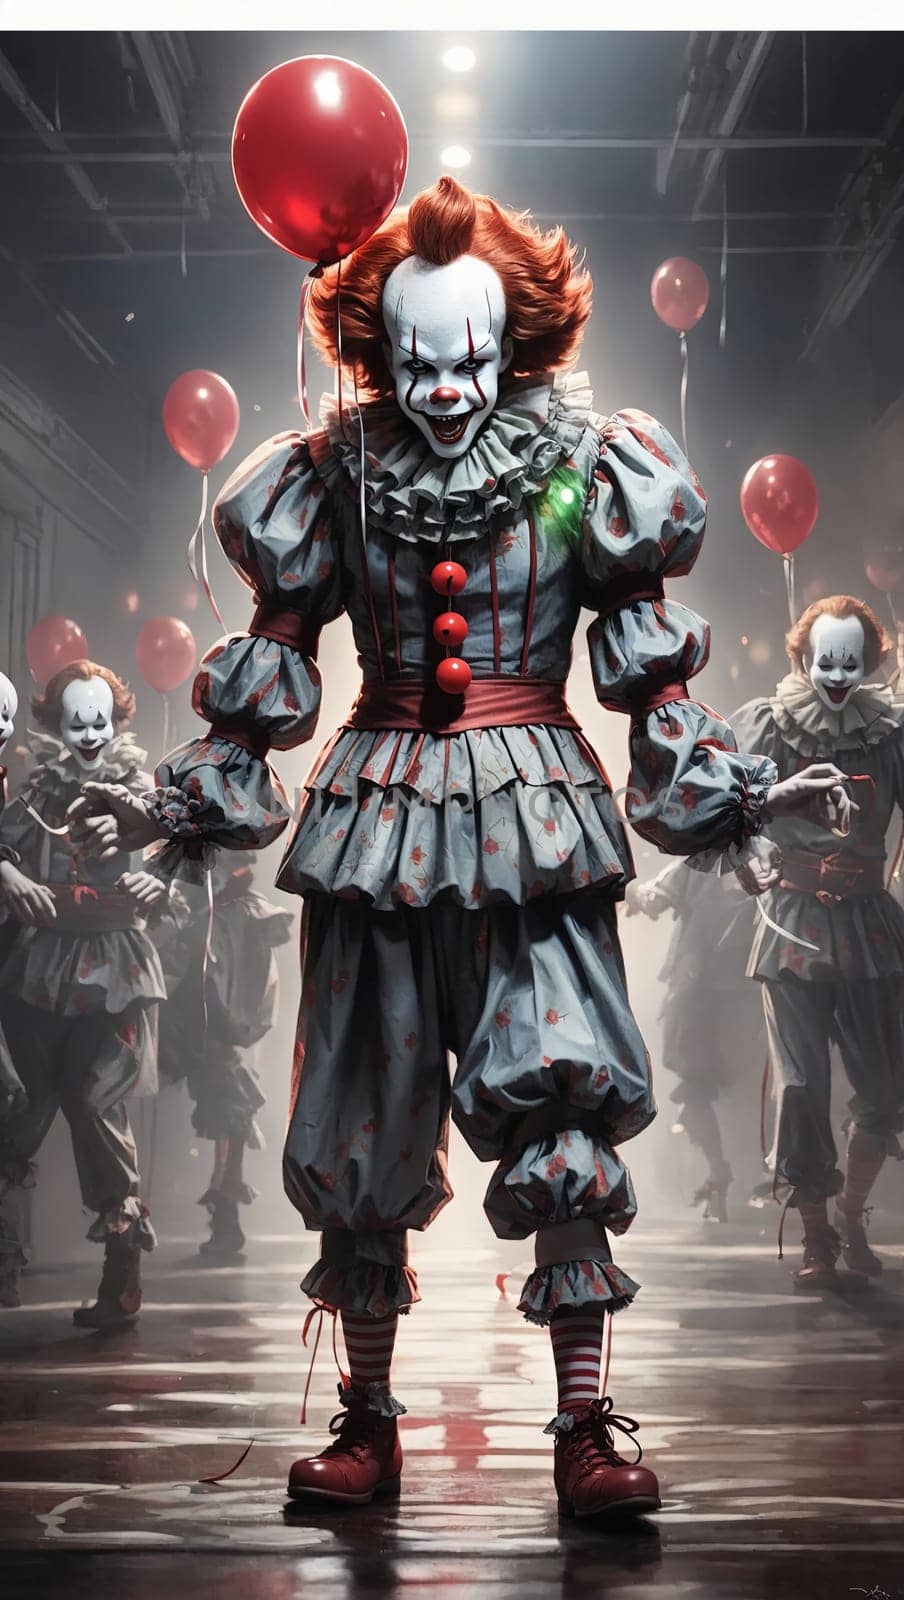 IT Horror movie scene showing scary Pennywise clown with red balloons in the dark. AI Generated.